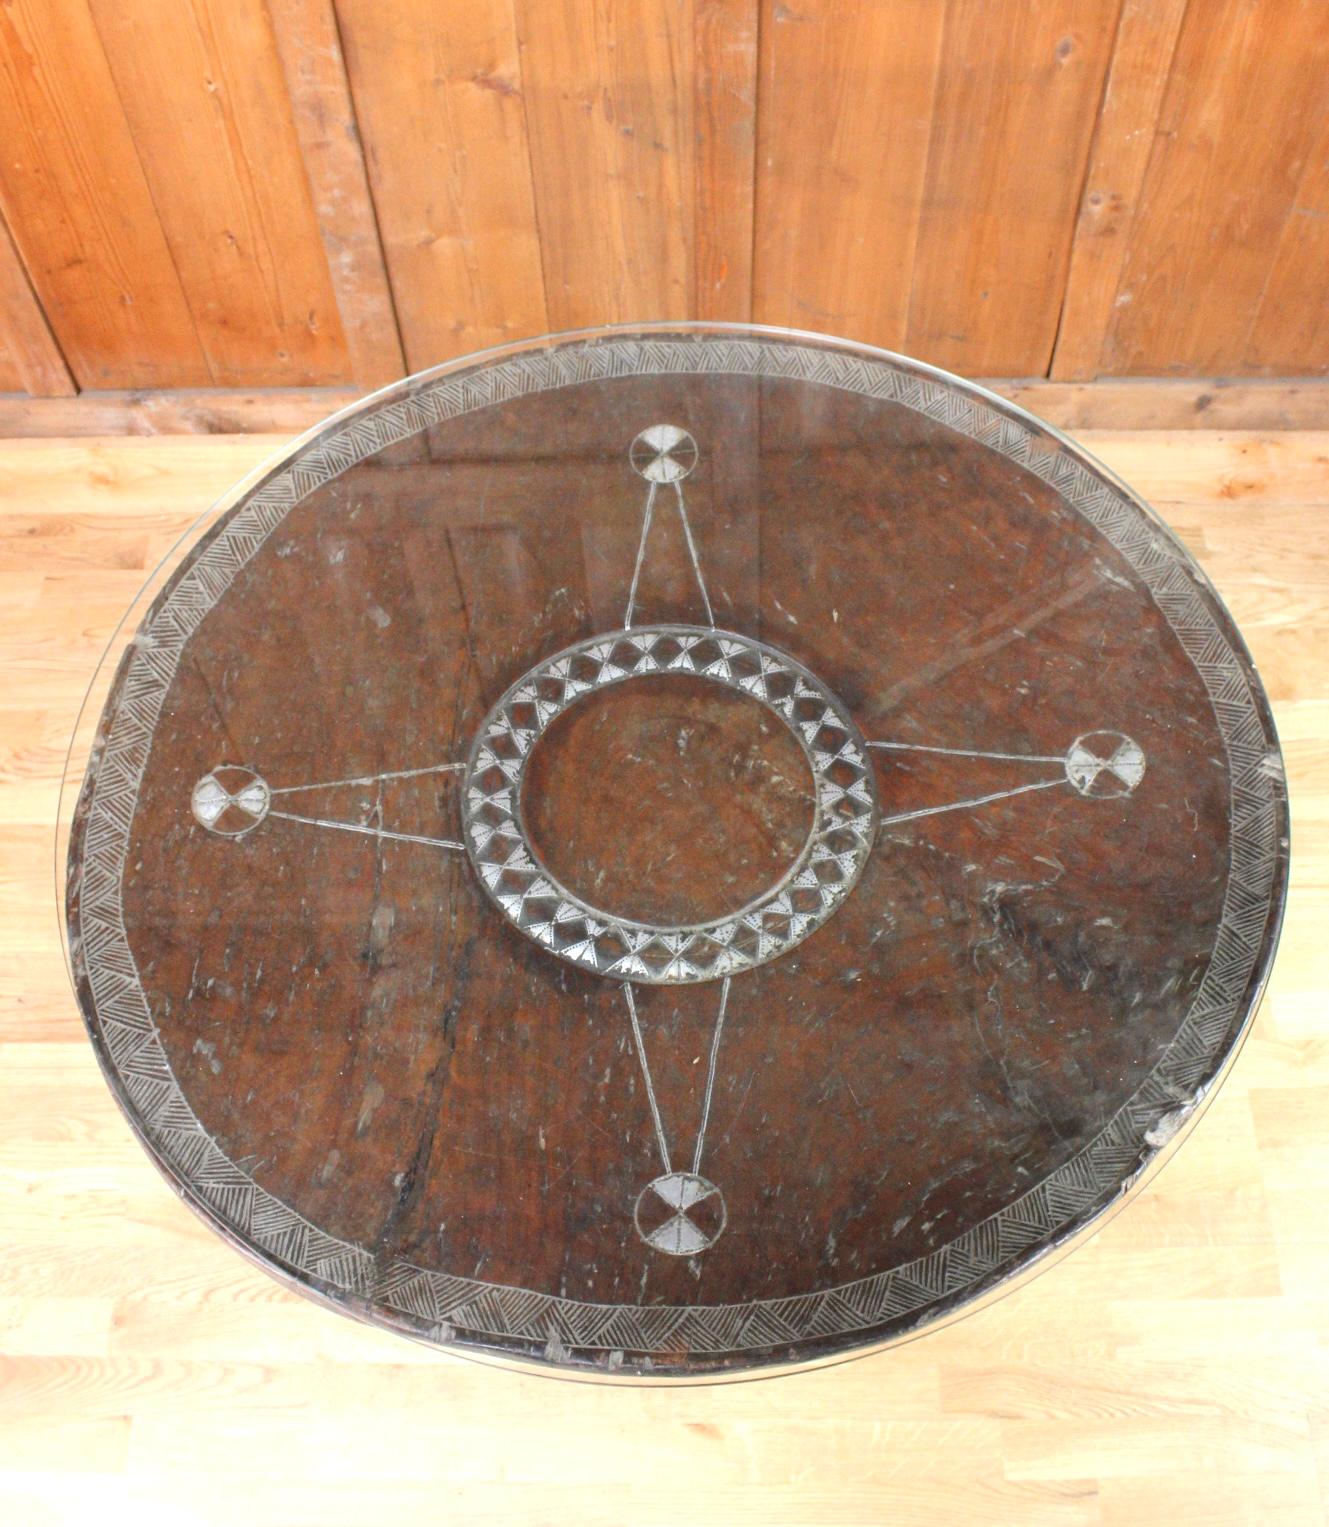 This 20th century table is a real ritual table of the Malinké people, sometimes used for sacrifices.
The Malinké people are a people of West Africa (Mali, Senegal).
This large indigenous wooden table is engraved and inlaid with metal pieces forming